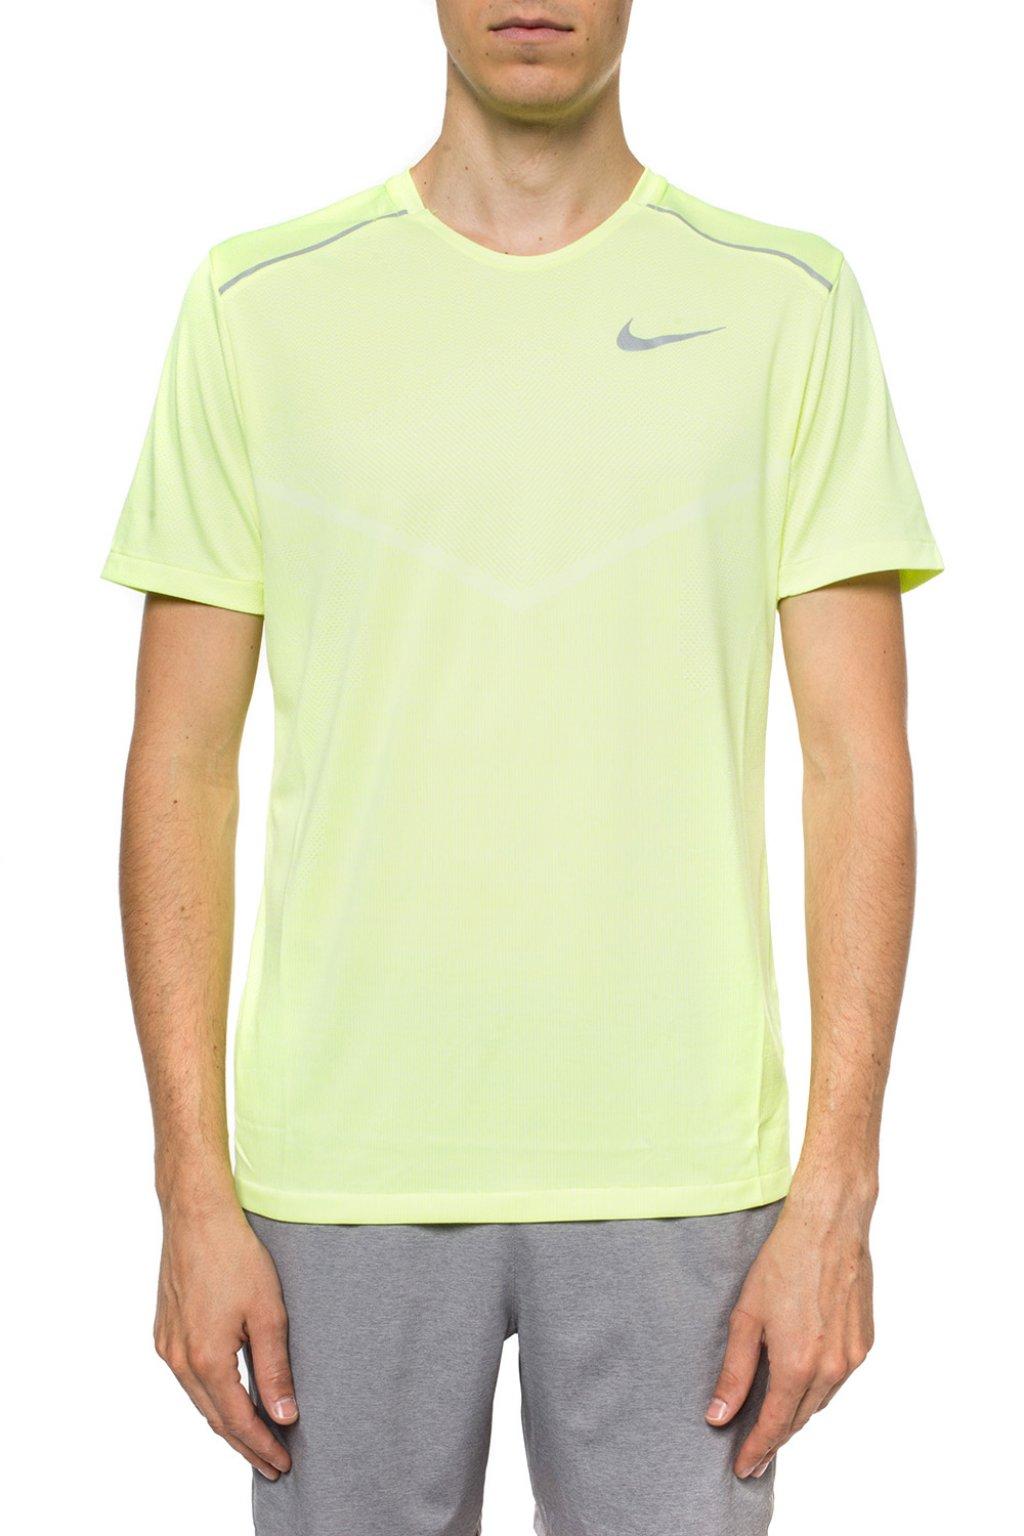 Nike Synthetic Logo-printed T-shirt in Neon (Yellow) for Men - Lyst